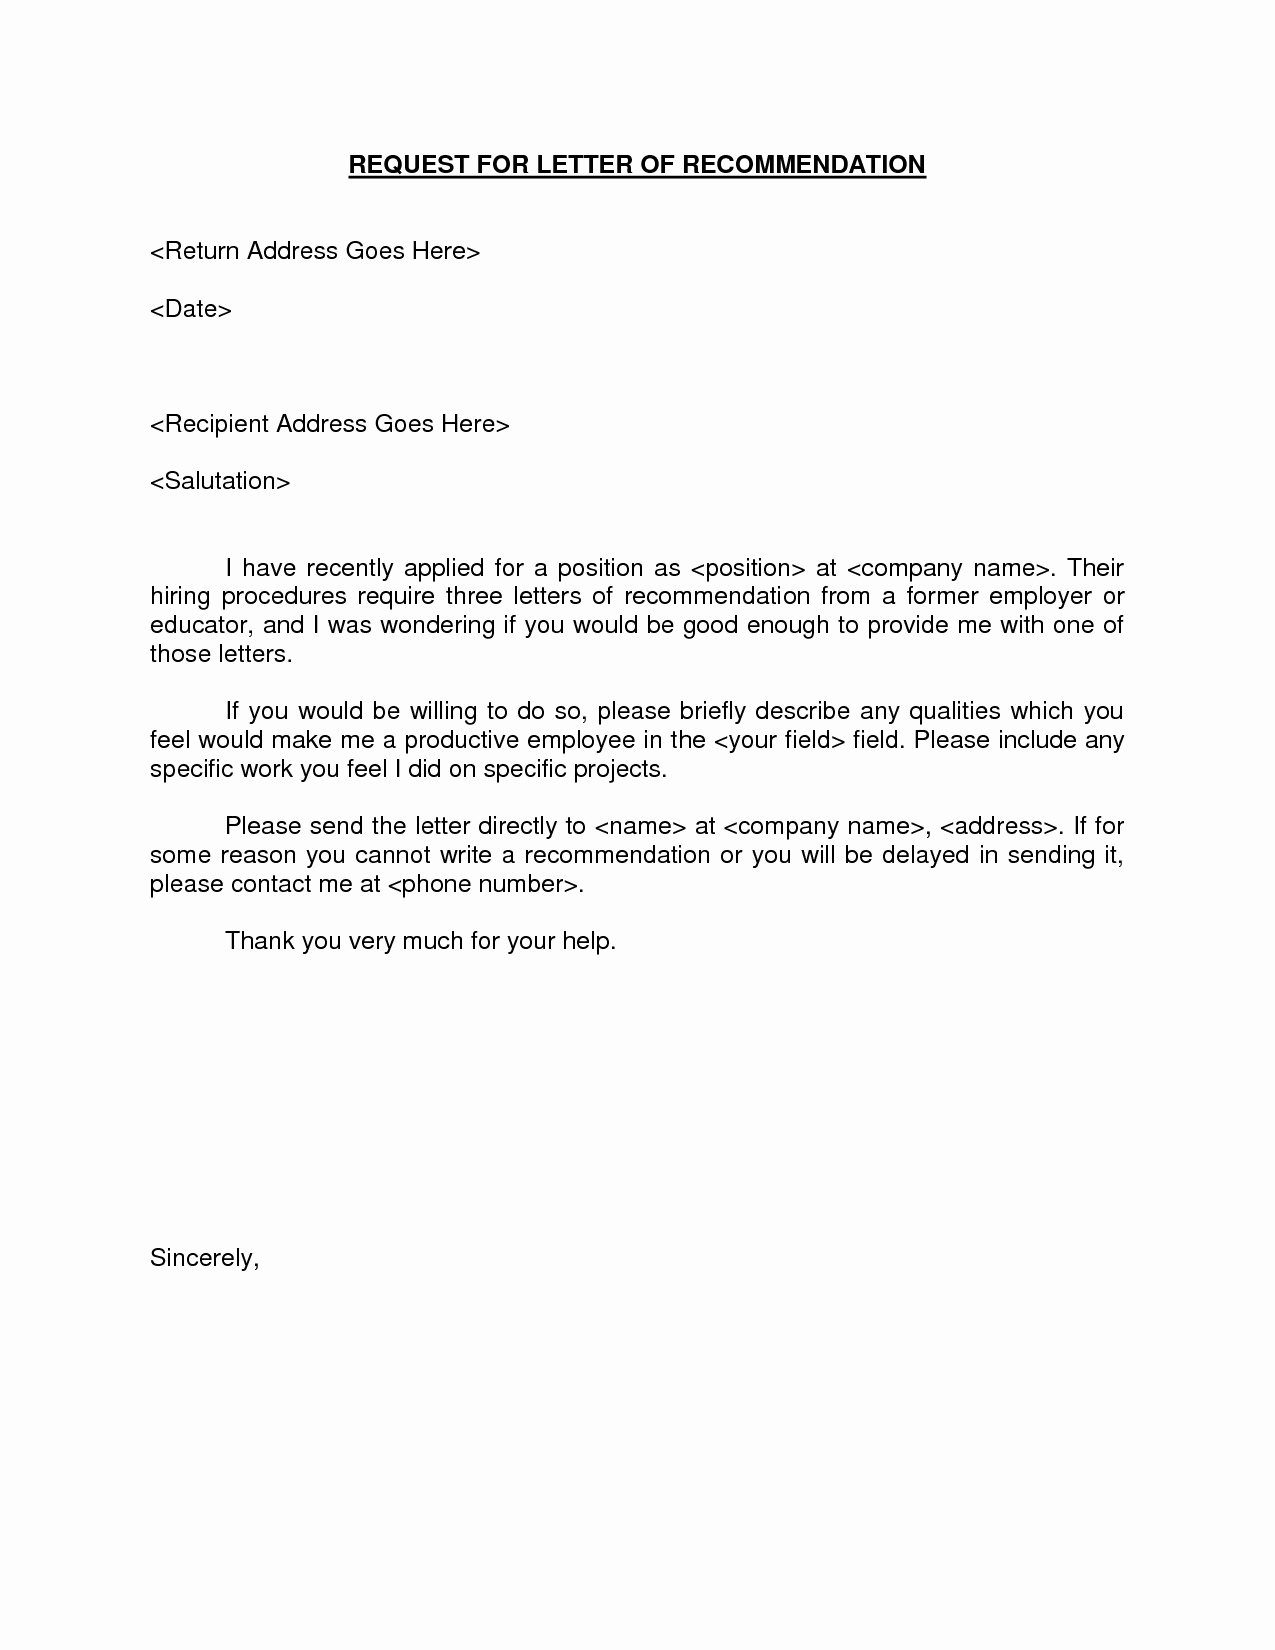 Letter Requesting Letter Of Recommendation Elegant Requesting A Letter Re Mendation Bbq Grill Recipes